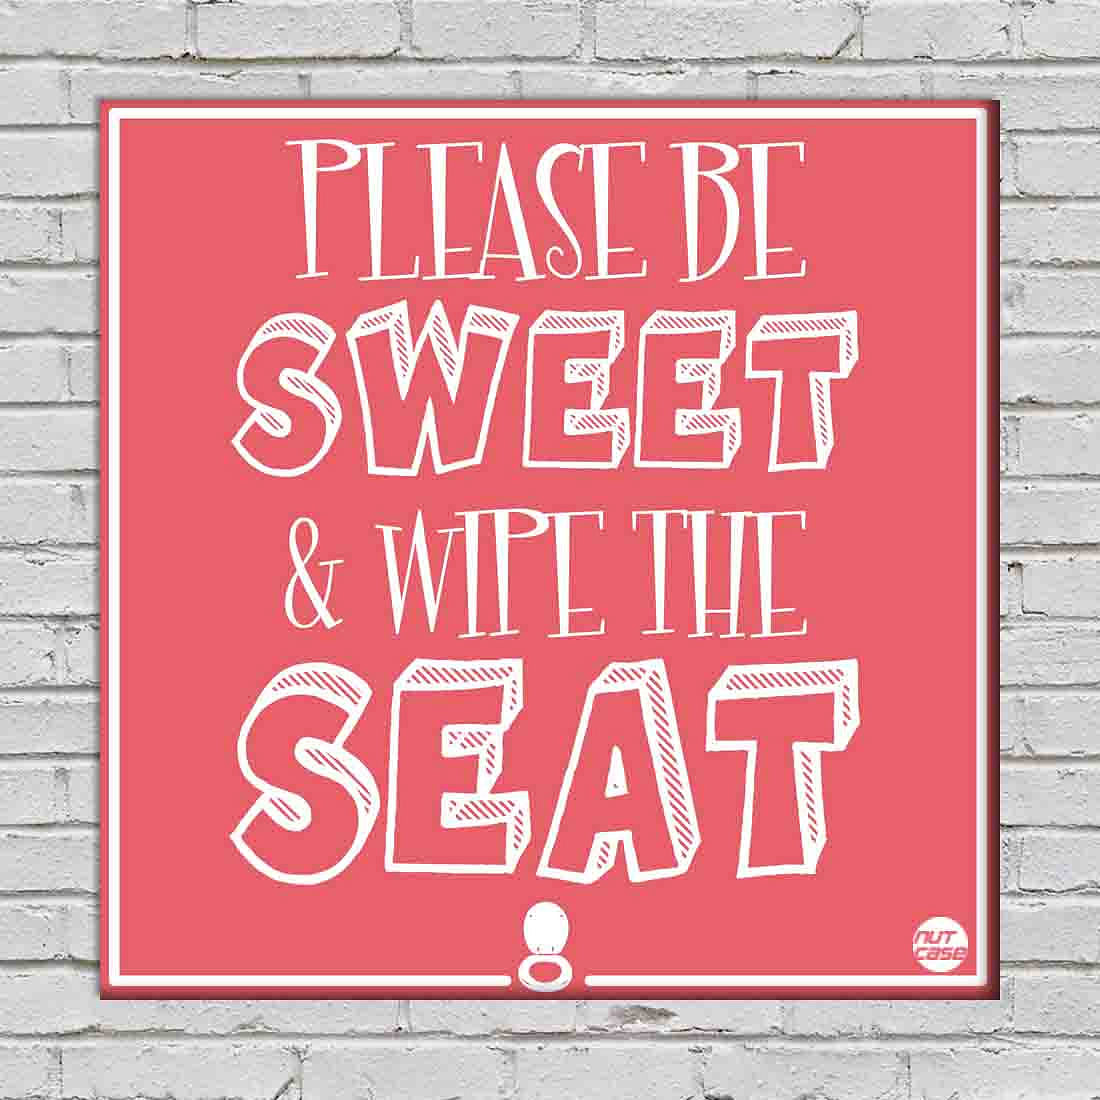 Wall Art Decor Panel For Home - Please Be Sweet Nutcase